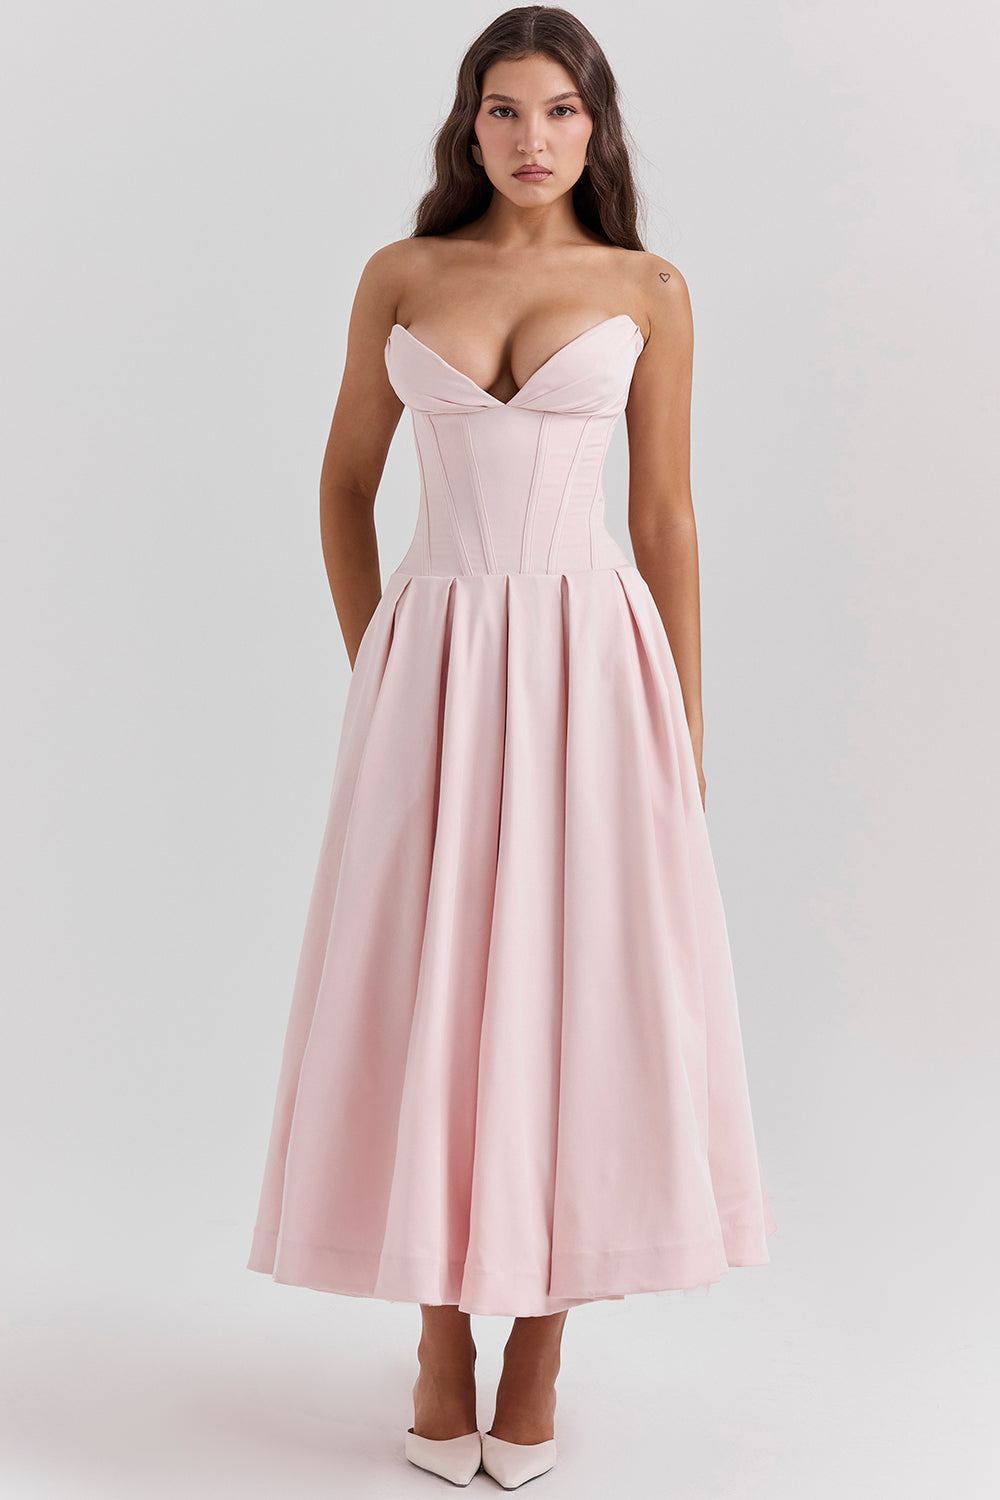 Hire HOUSE OF CB Lady Strapless Midi Dress in Ballerina Pink